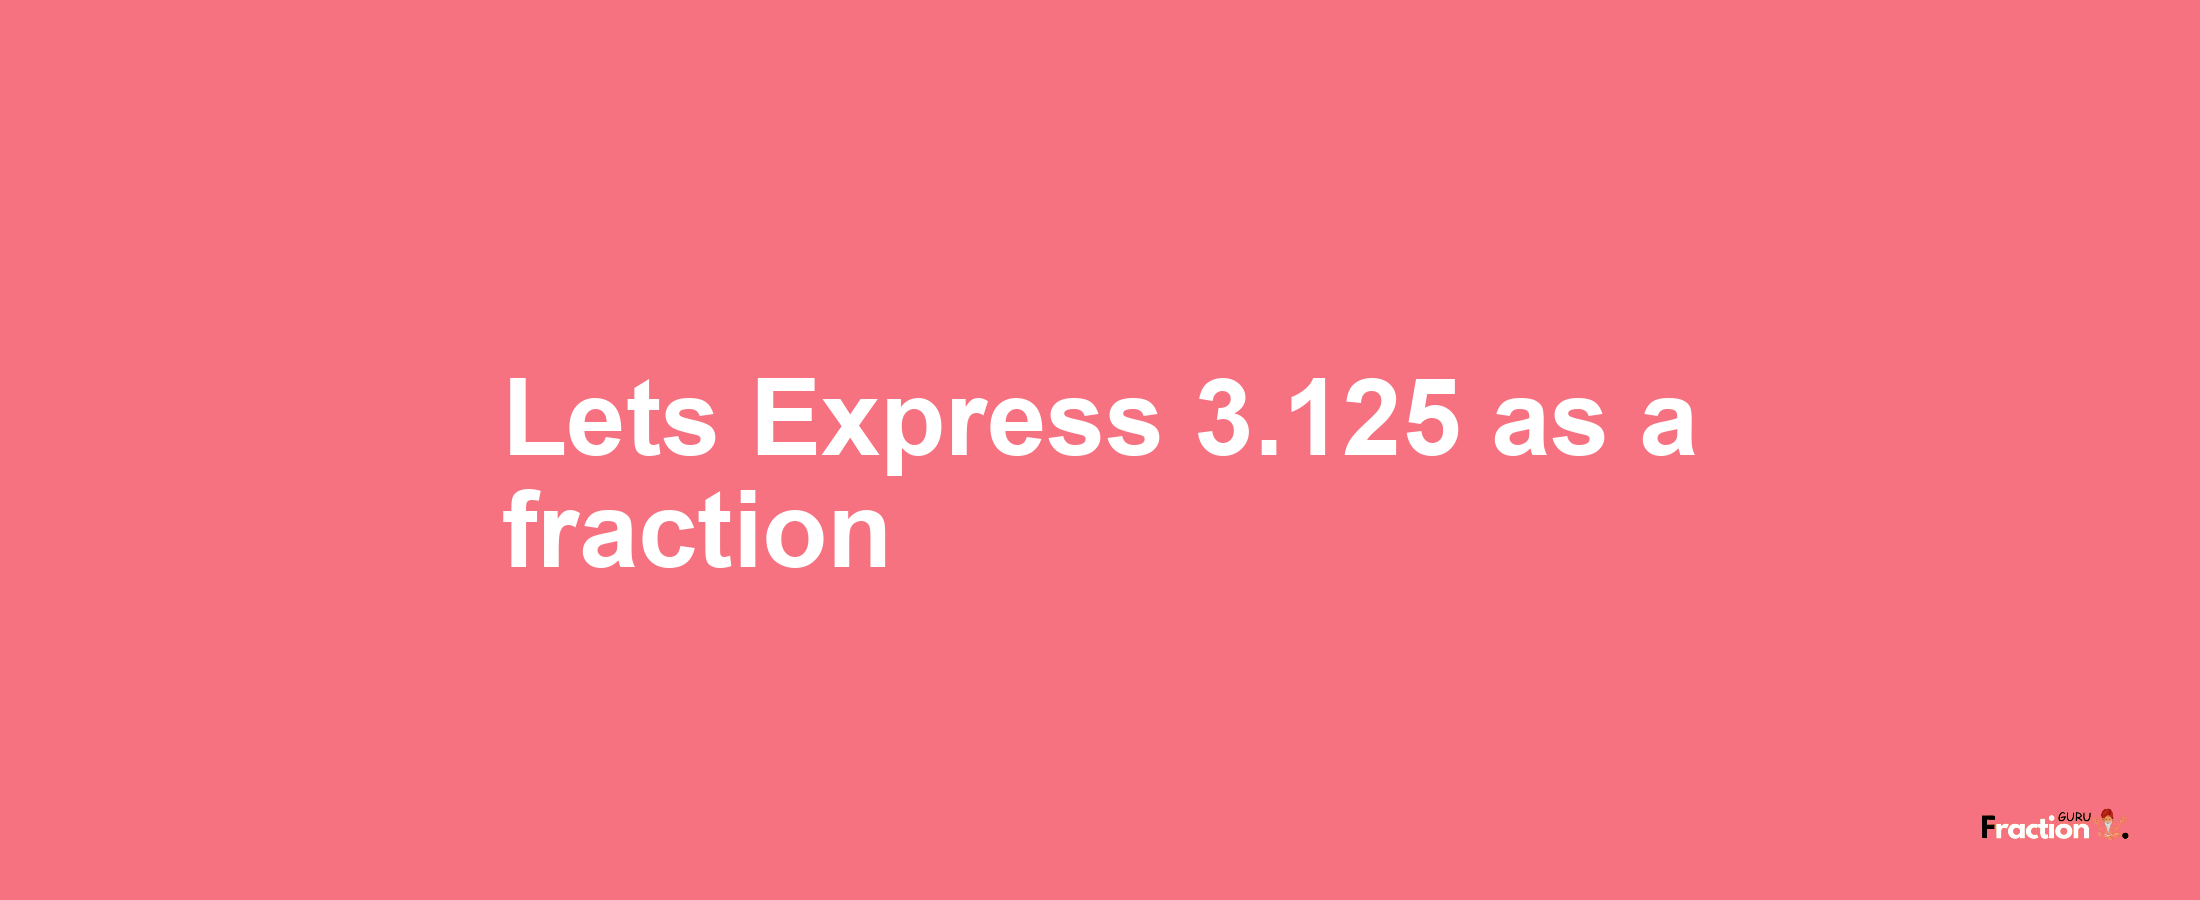 Lets Express 3.125 as afraction